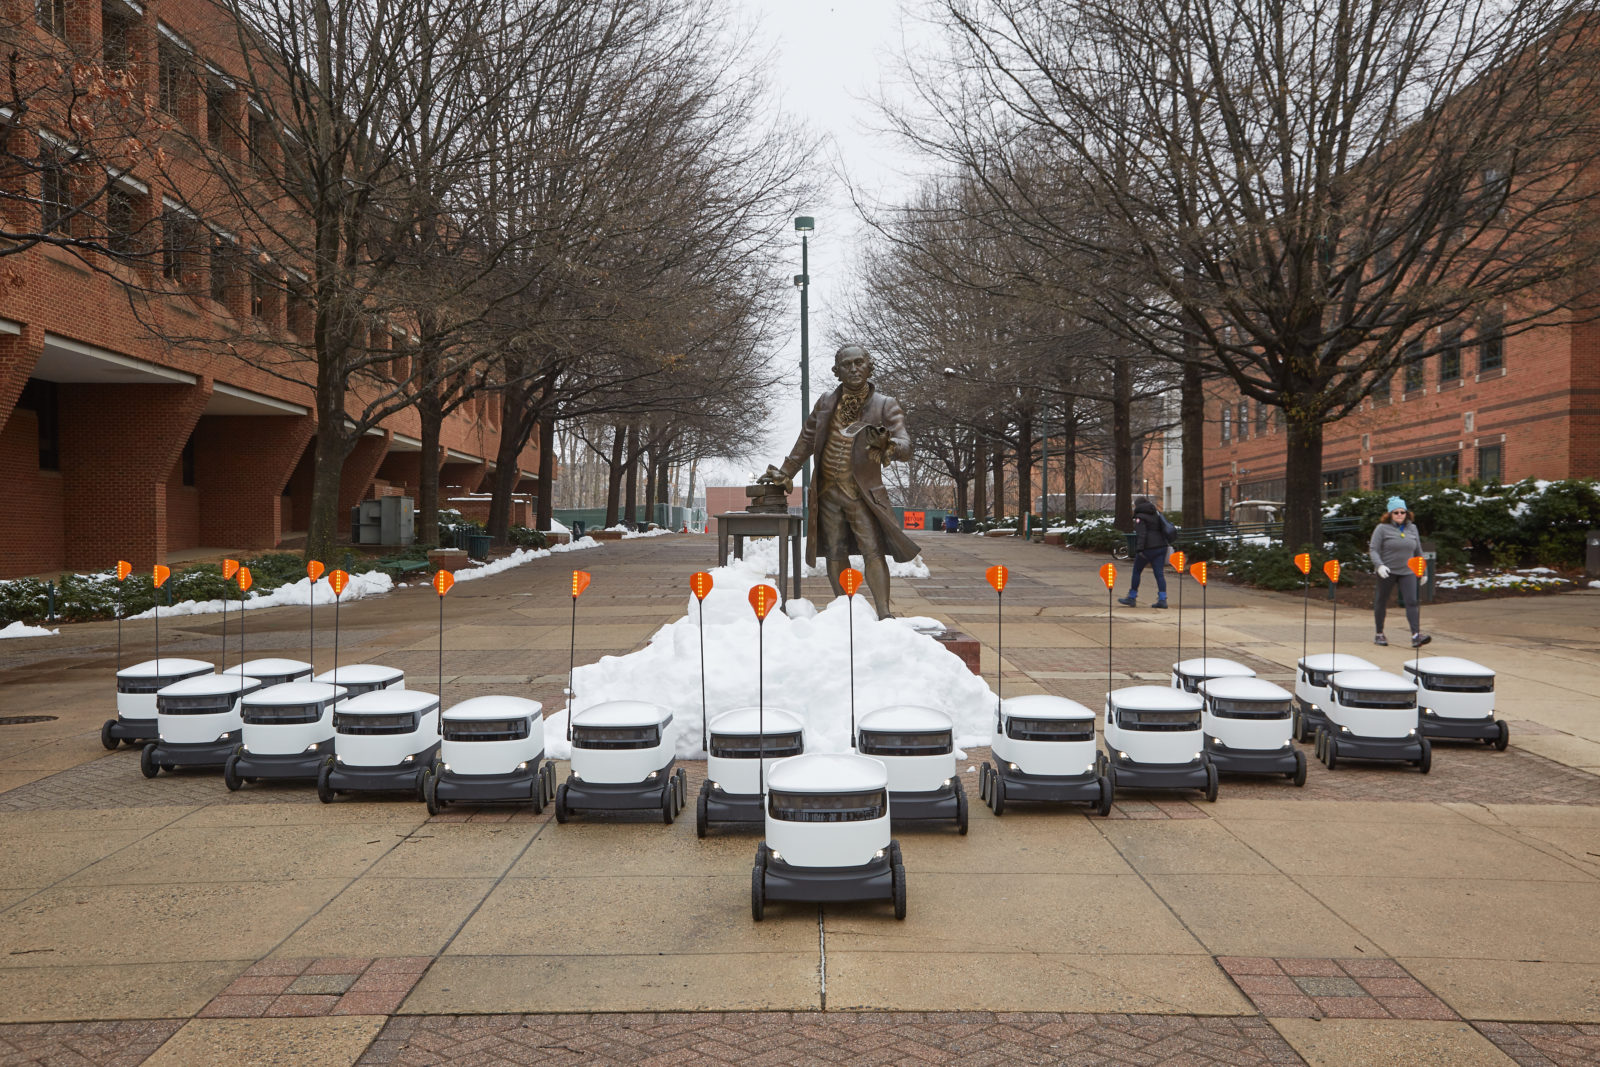 Black and white food delivery robots lined up.